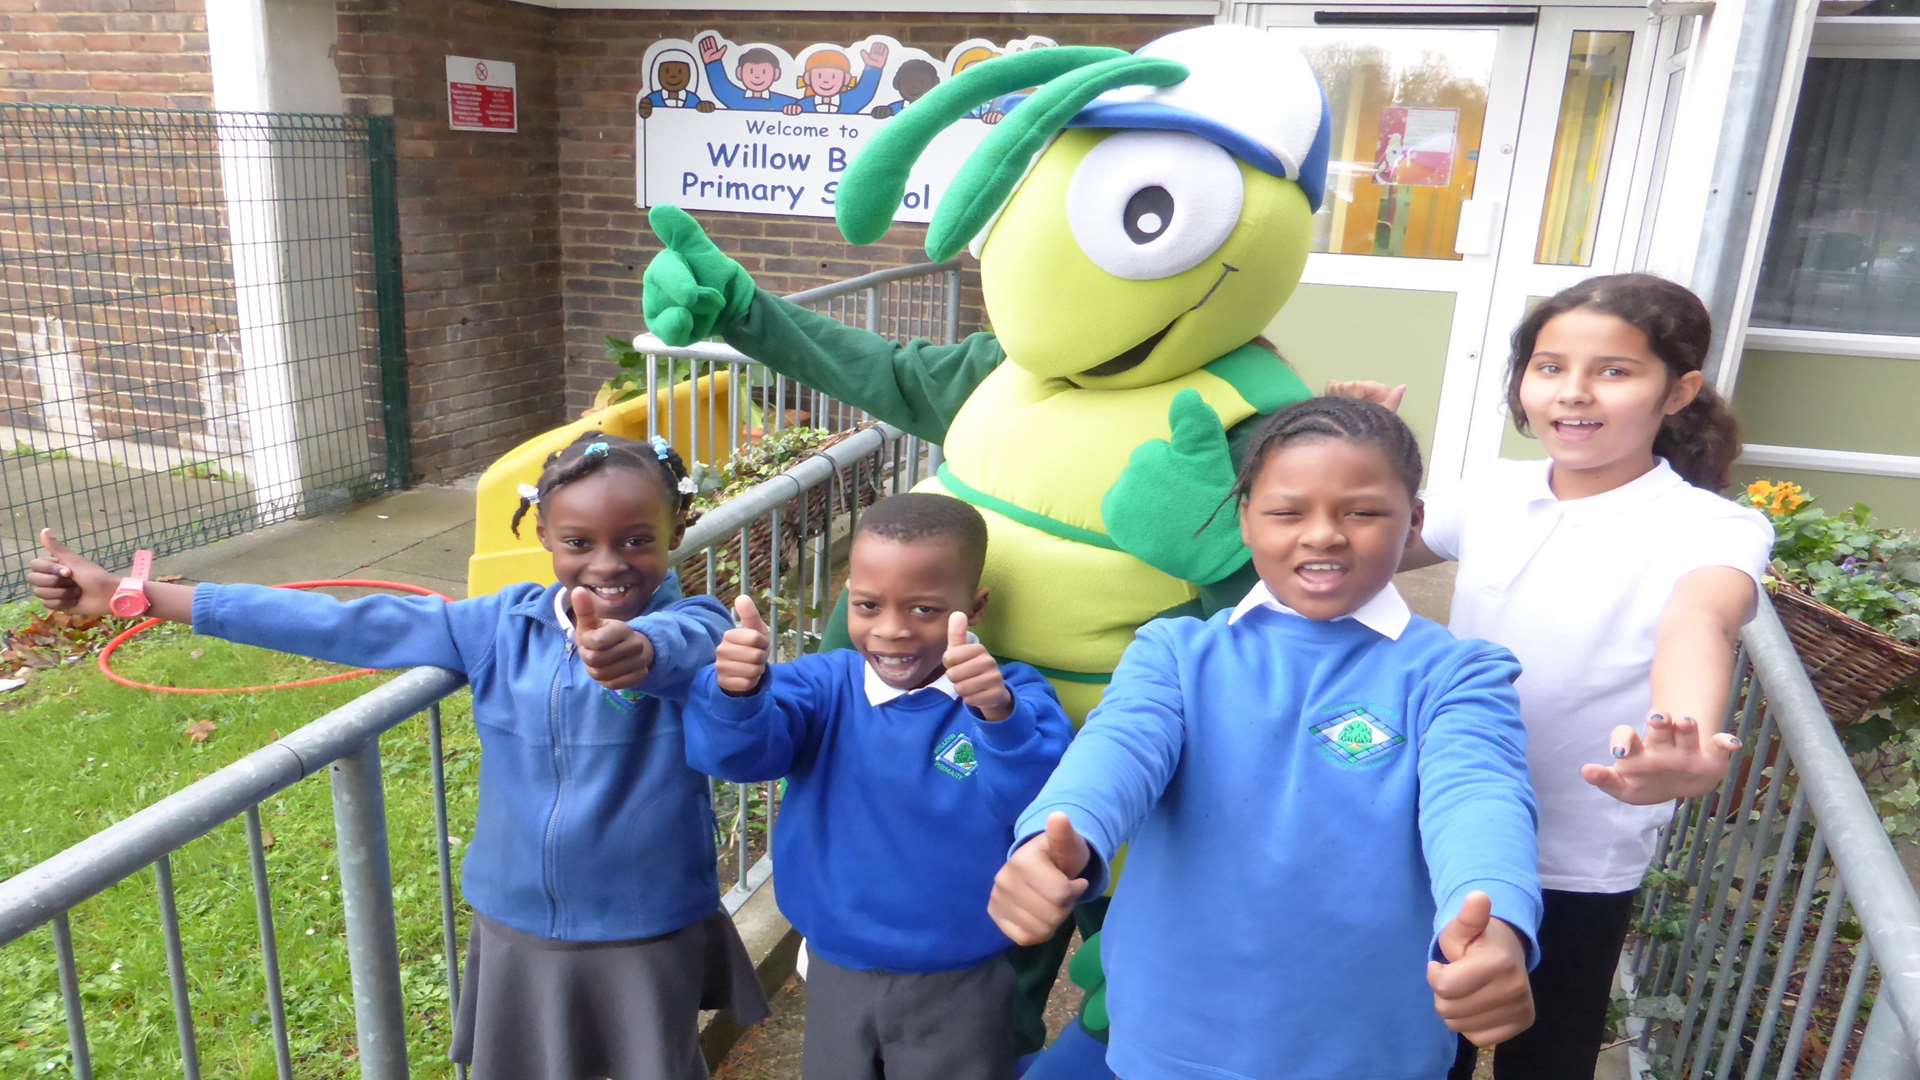 Willow Bank Primary School in Bexley celebrates the launch of KM Walk to School.